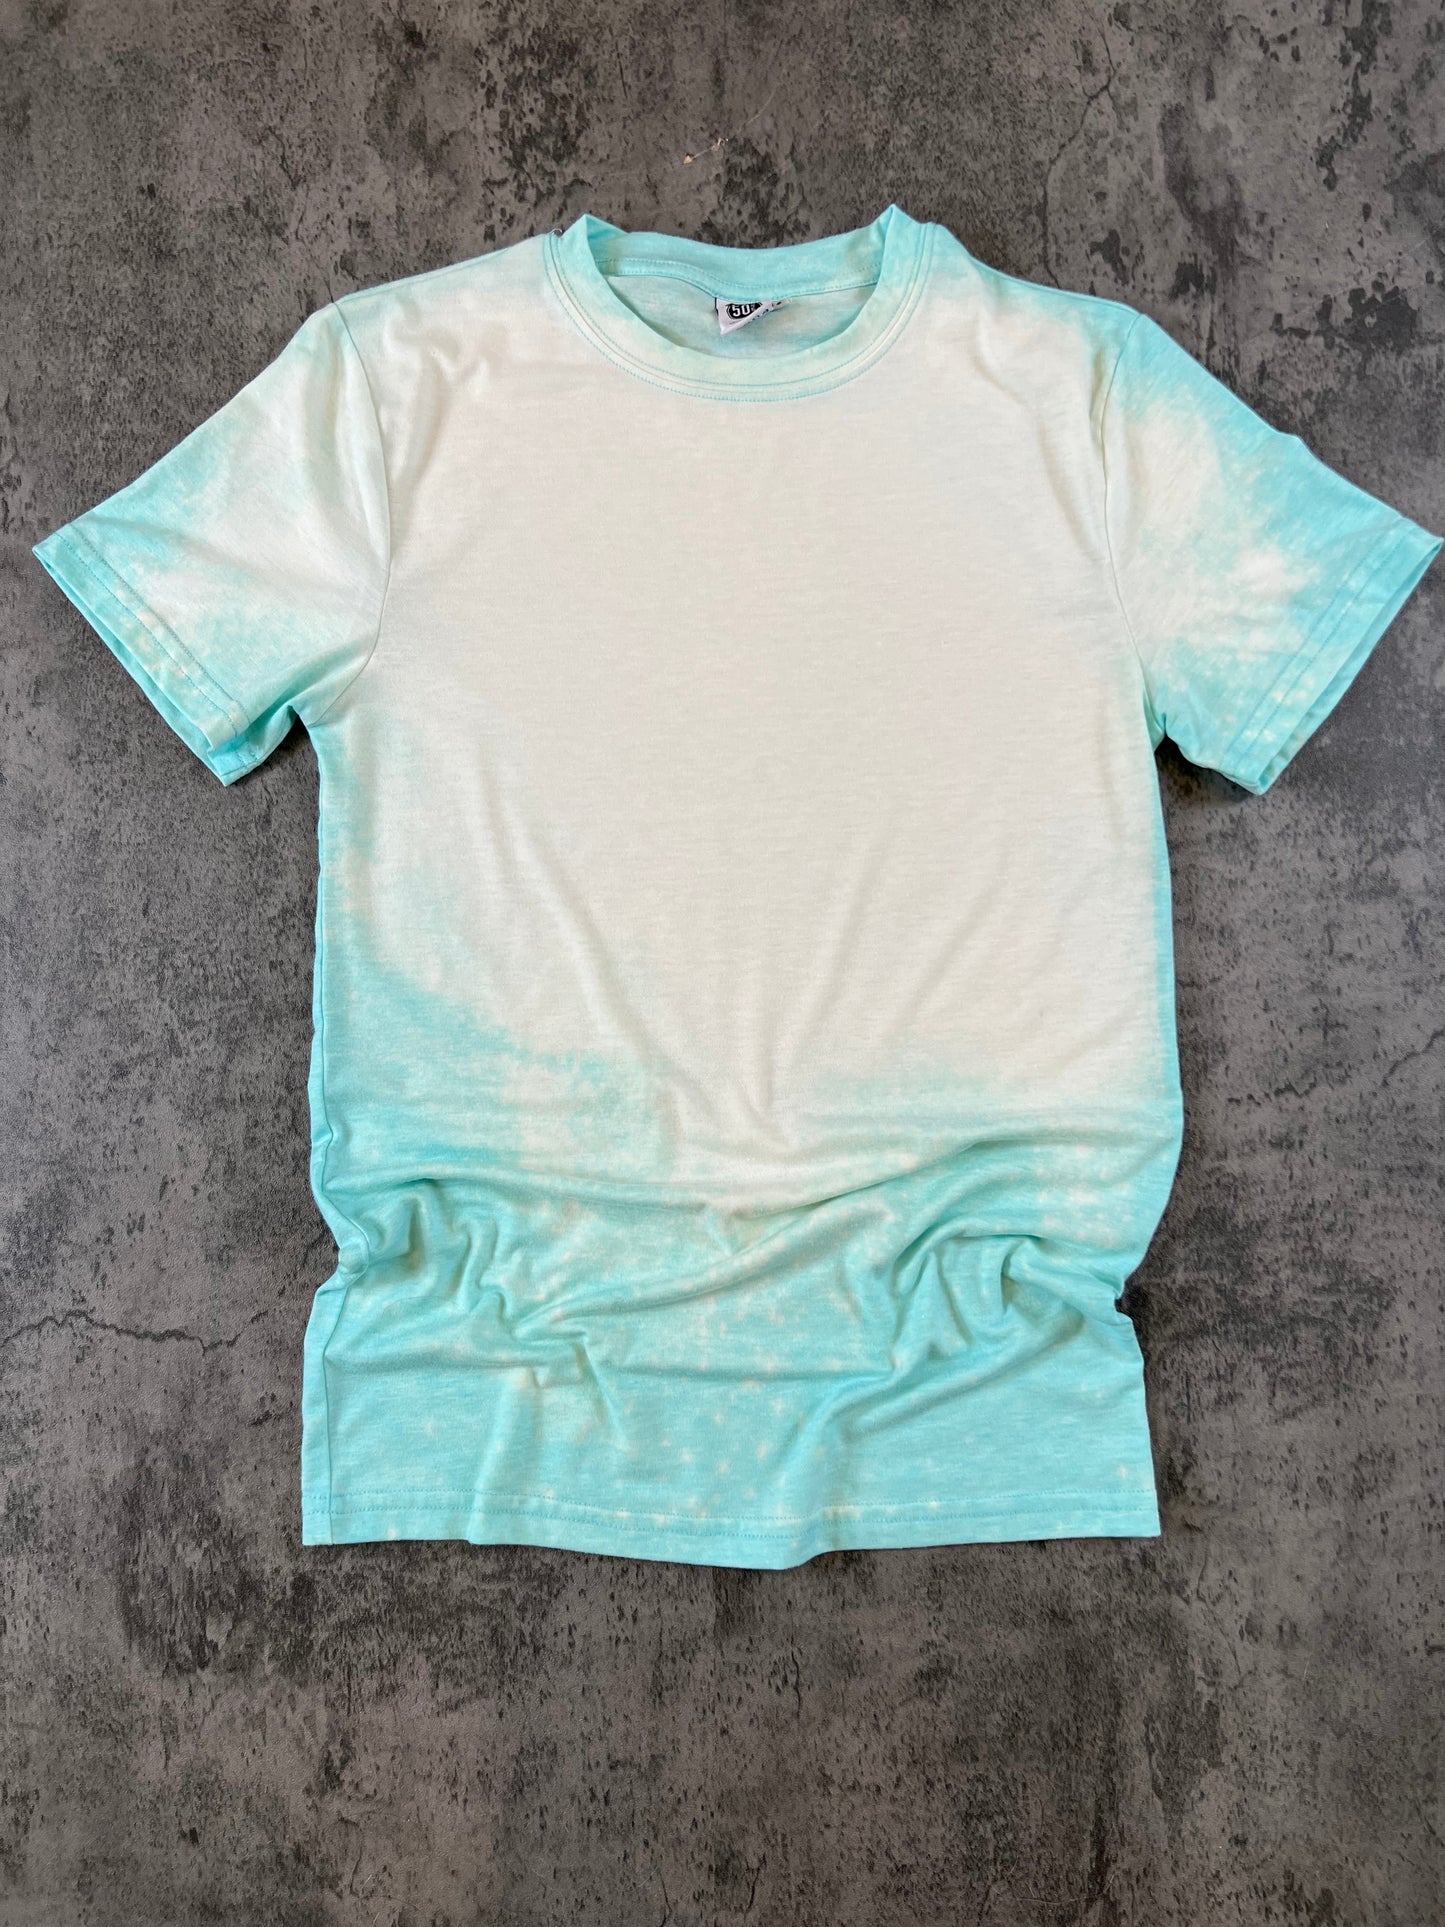 Aqua blue t-shirt with bleached front chest area, laying flat on a concrete background